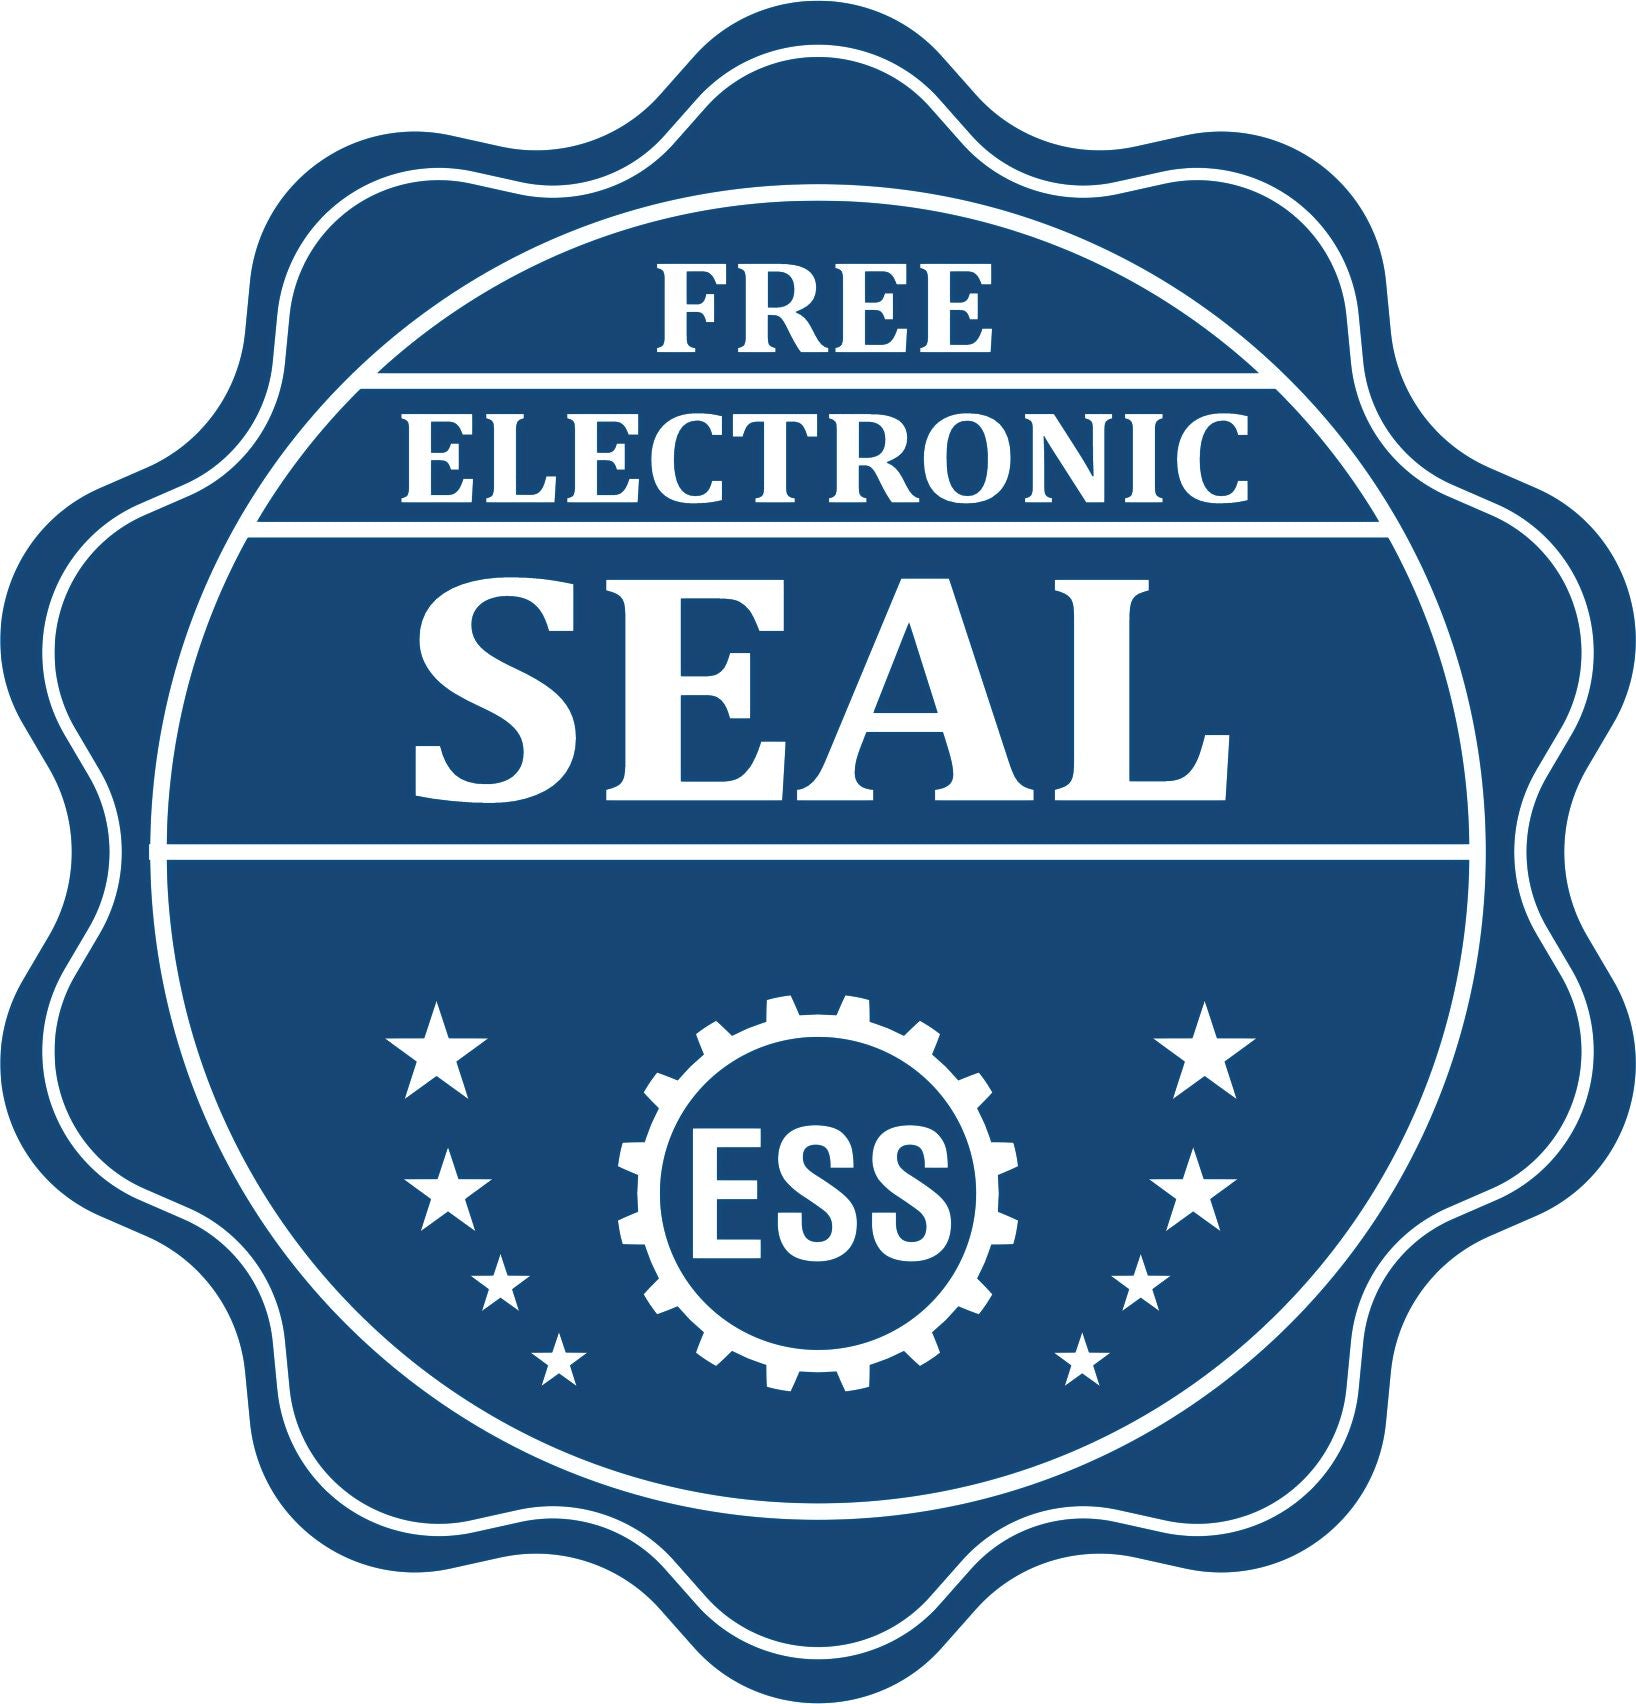 A badge showing a free electronic seal for the Montana Professional Engineer Seal Stamp with stars and the ESS gear on the emblem.